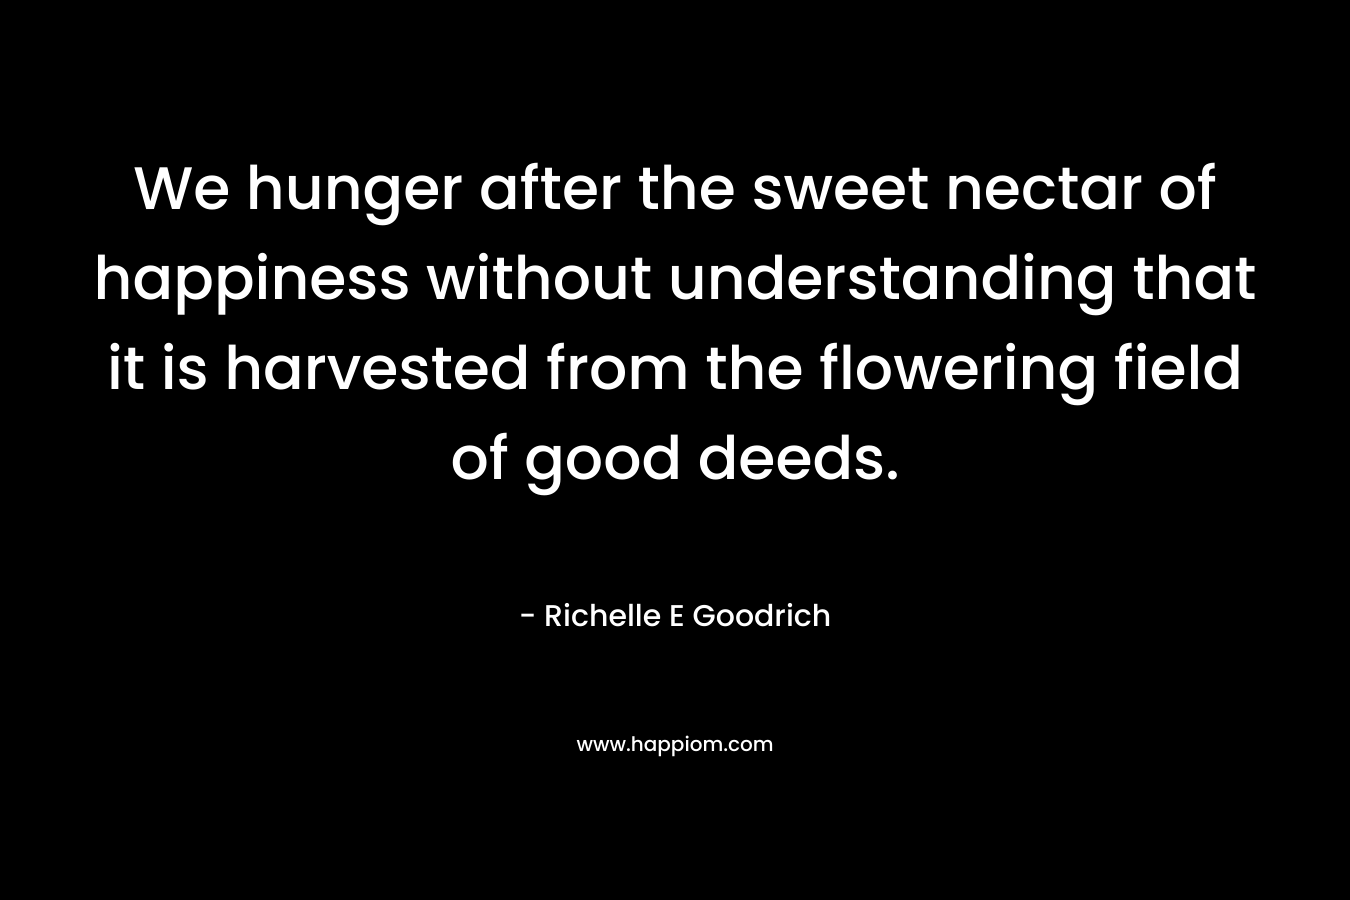 We hunger after the sweet nectar of happiness without understanding that it is harvested from the flowering field of good deeds.